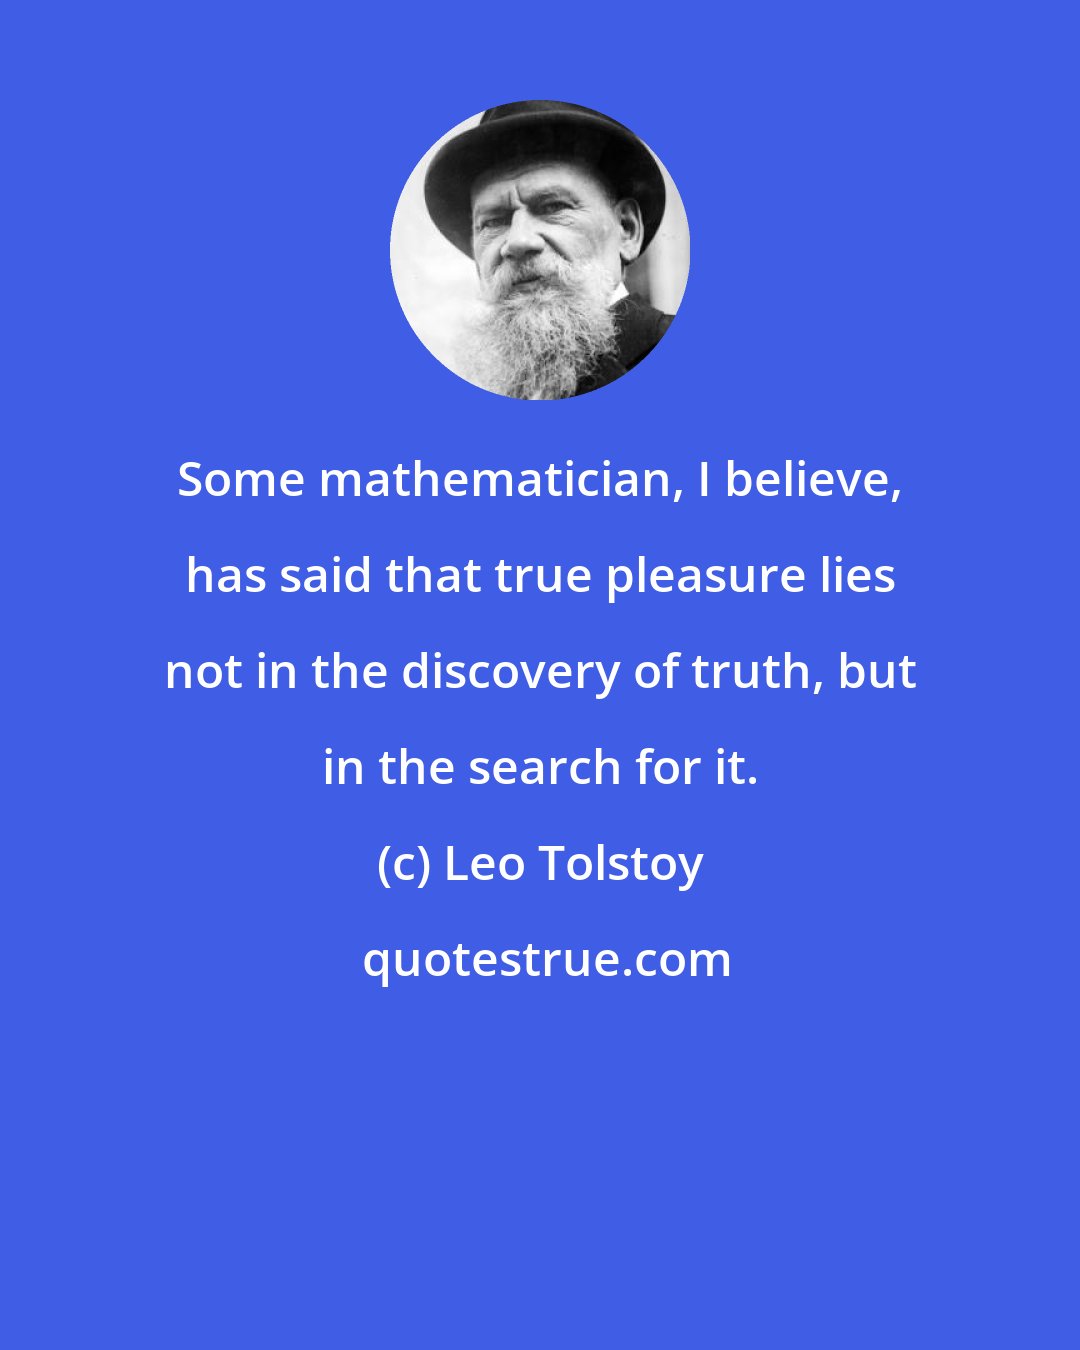 Leo Tolstoy: Some mathematician, I believe, has said that true pleasure lies not in the discovery of truth, but in the search for it.